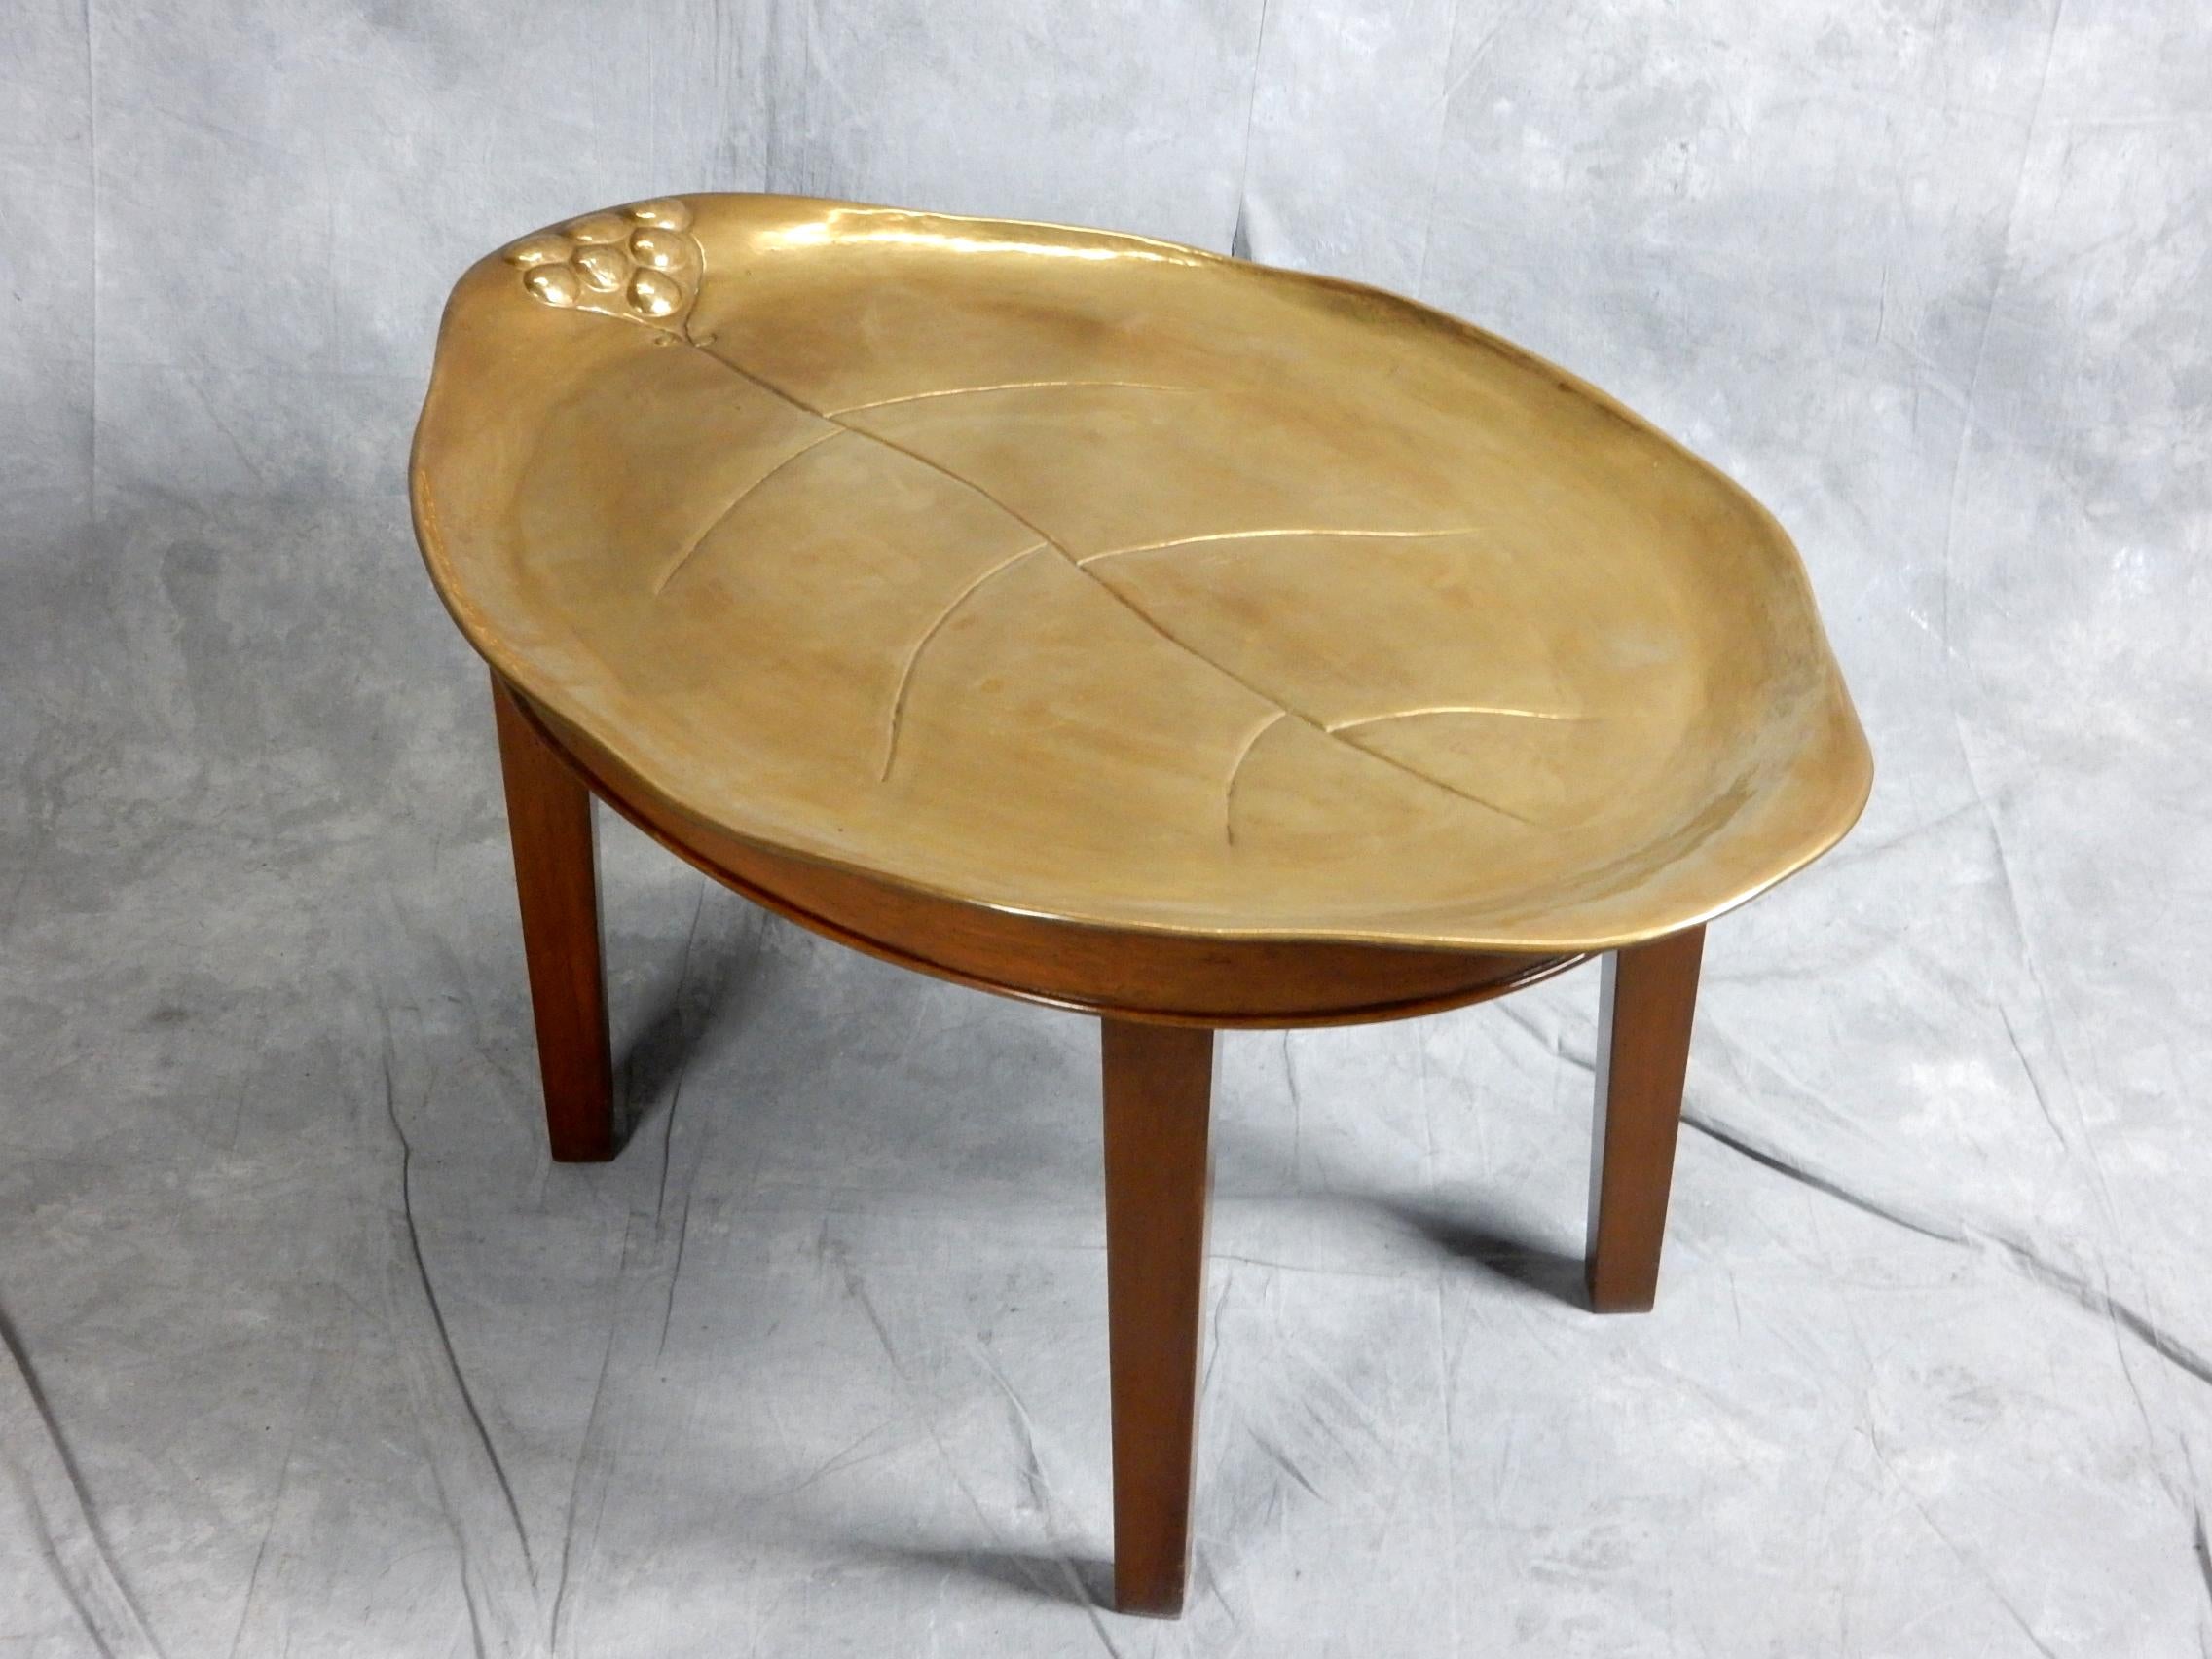 Exceptional quality artisan sculpted tray coffee table.
Hand hammered and crafted brass tray top in the shape of a leaf
with a custom made 4 leg wood base. 
Inset footed tray lifts off base with ease but is secure(will not slide) when in